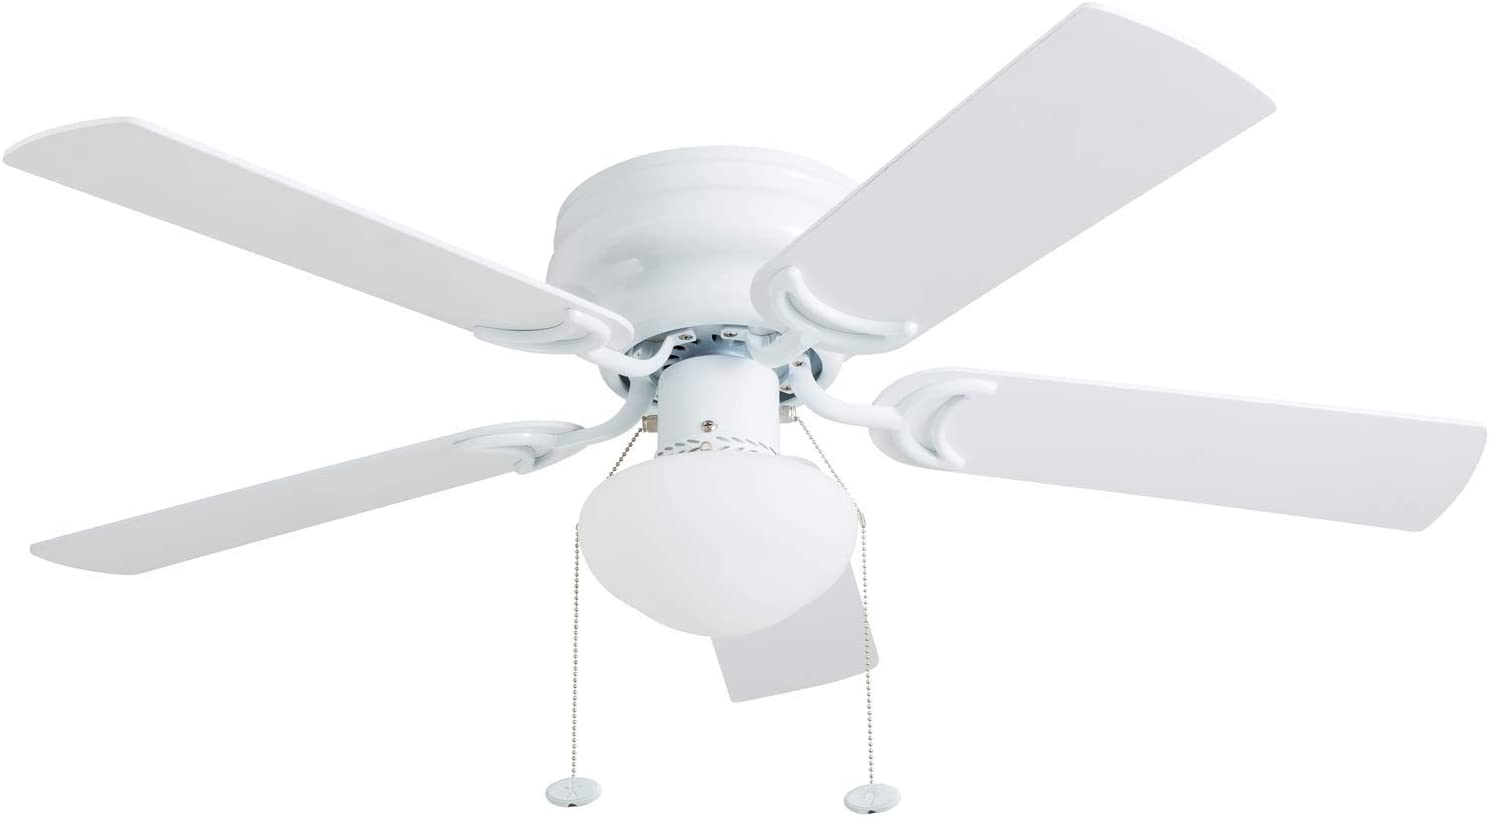 Prominence Home 80092-01 Alvina Ceiling Fan